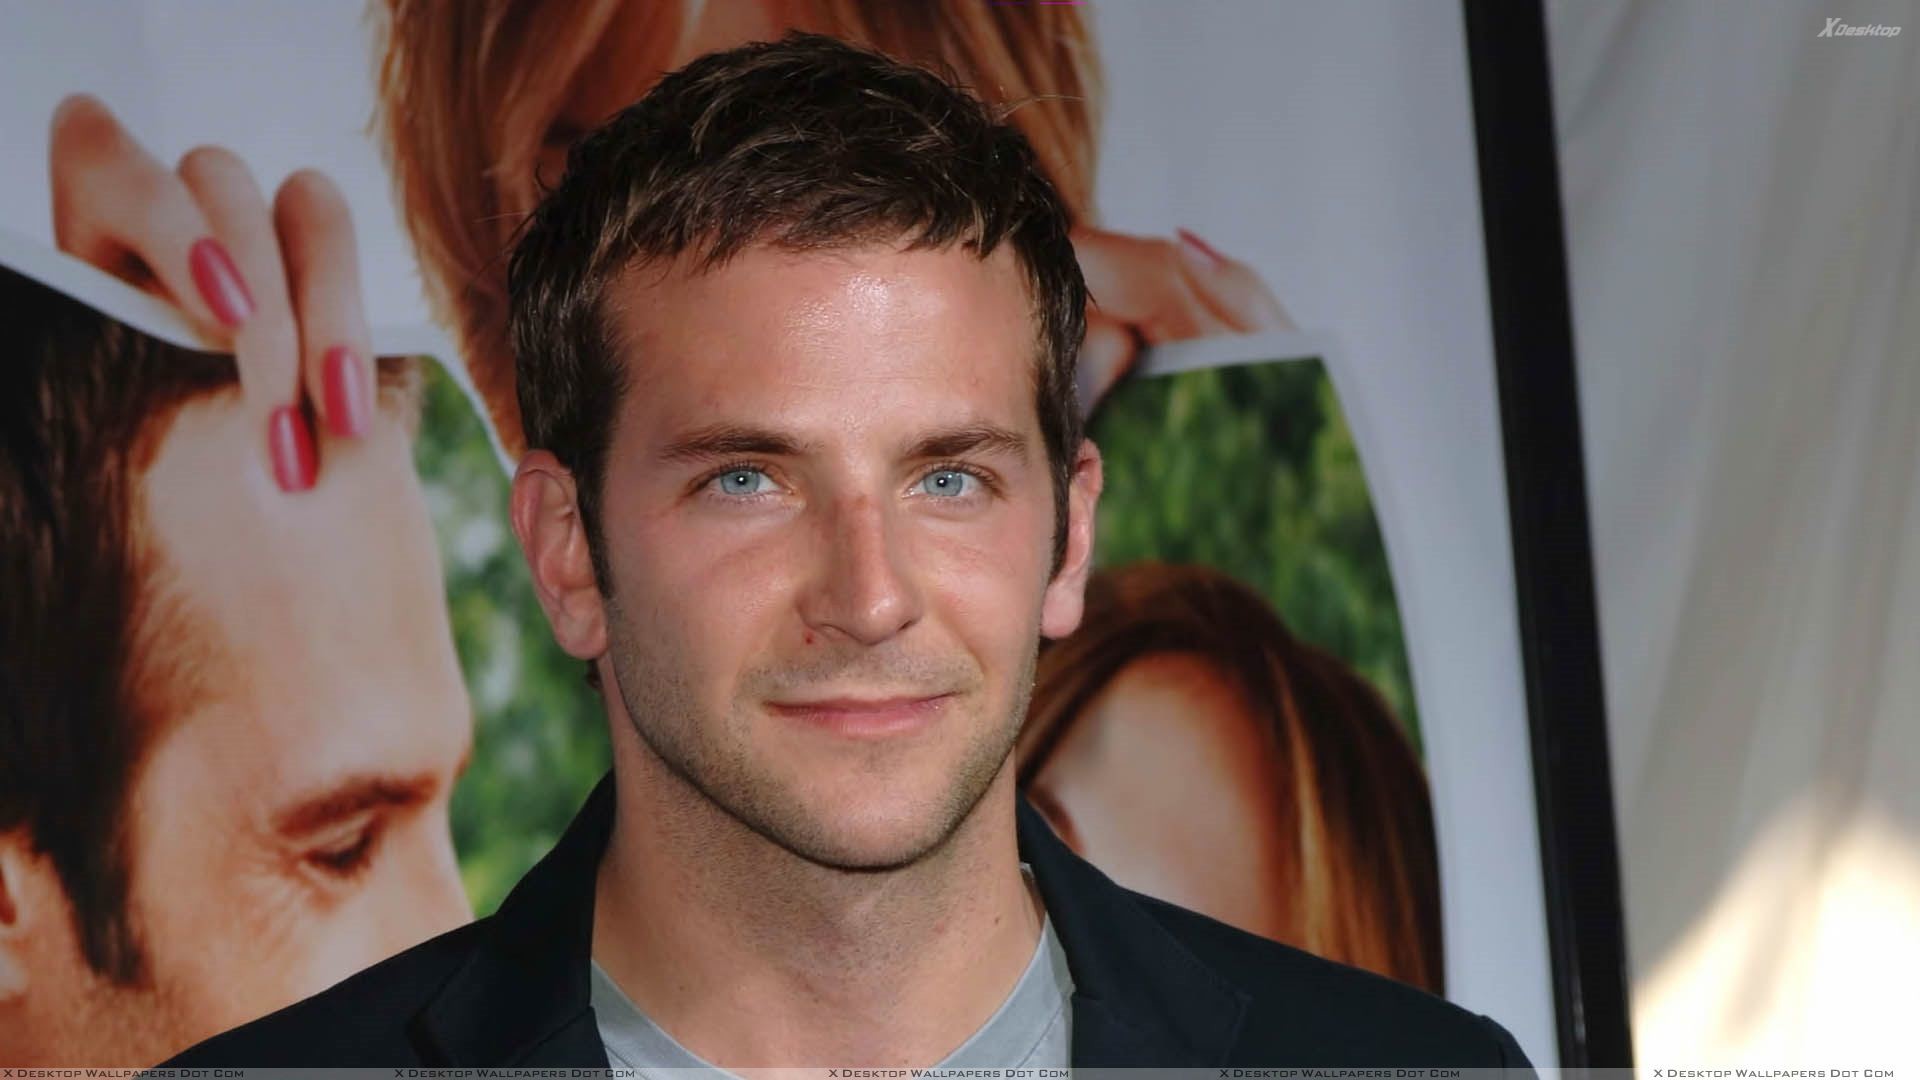 1920x1080 You are viewing wallpaper titled "Bradley Cooper ...